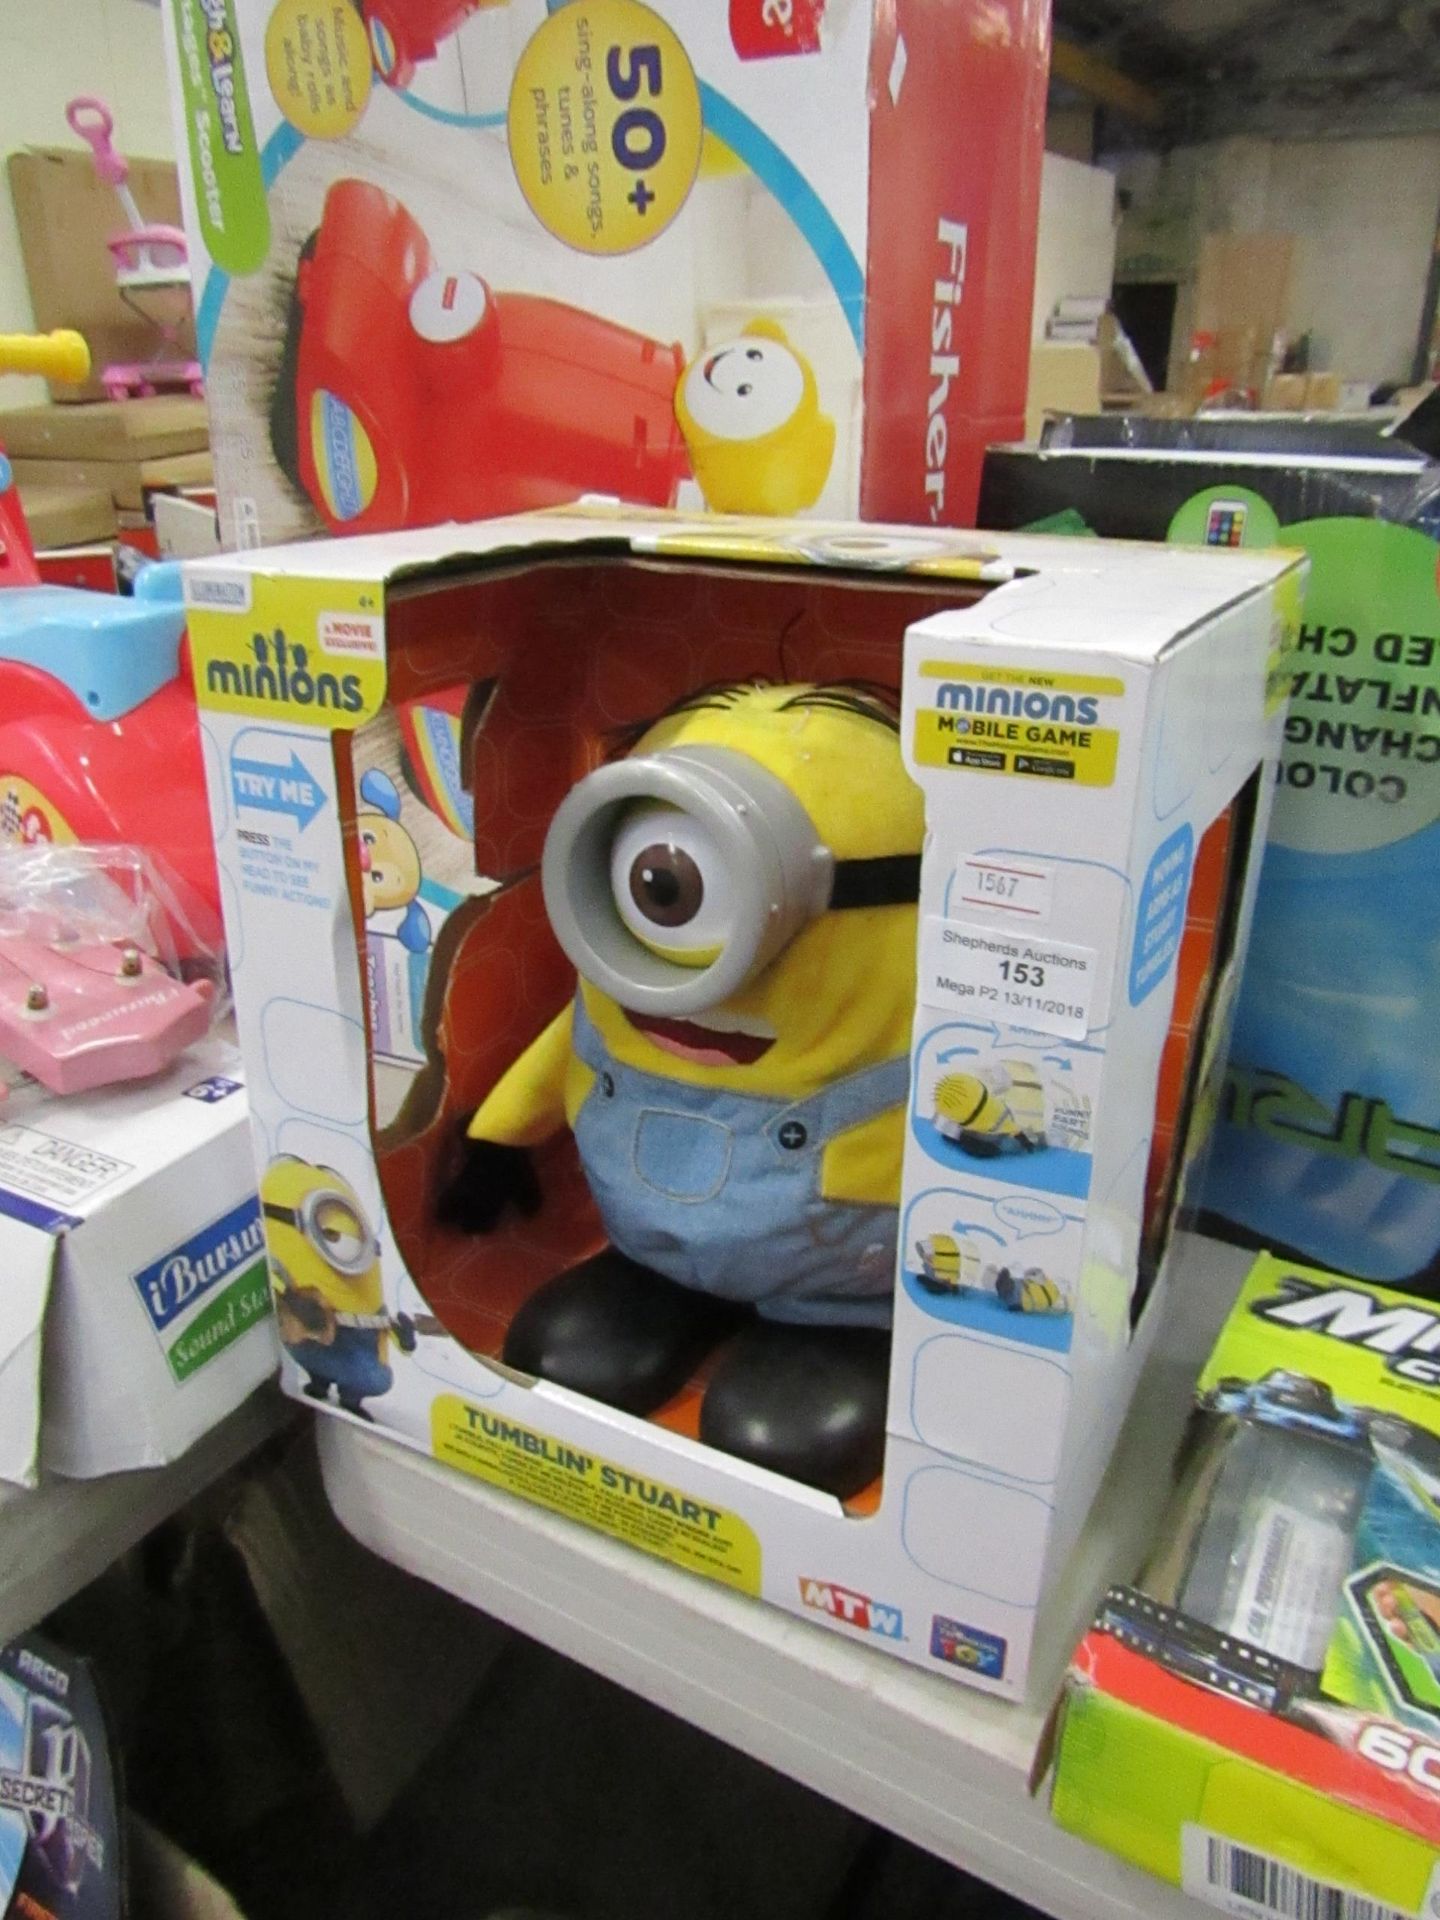 Minions tumblin' Stuart, untested and packaged.